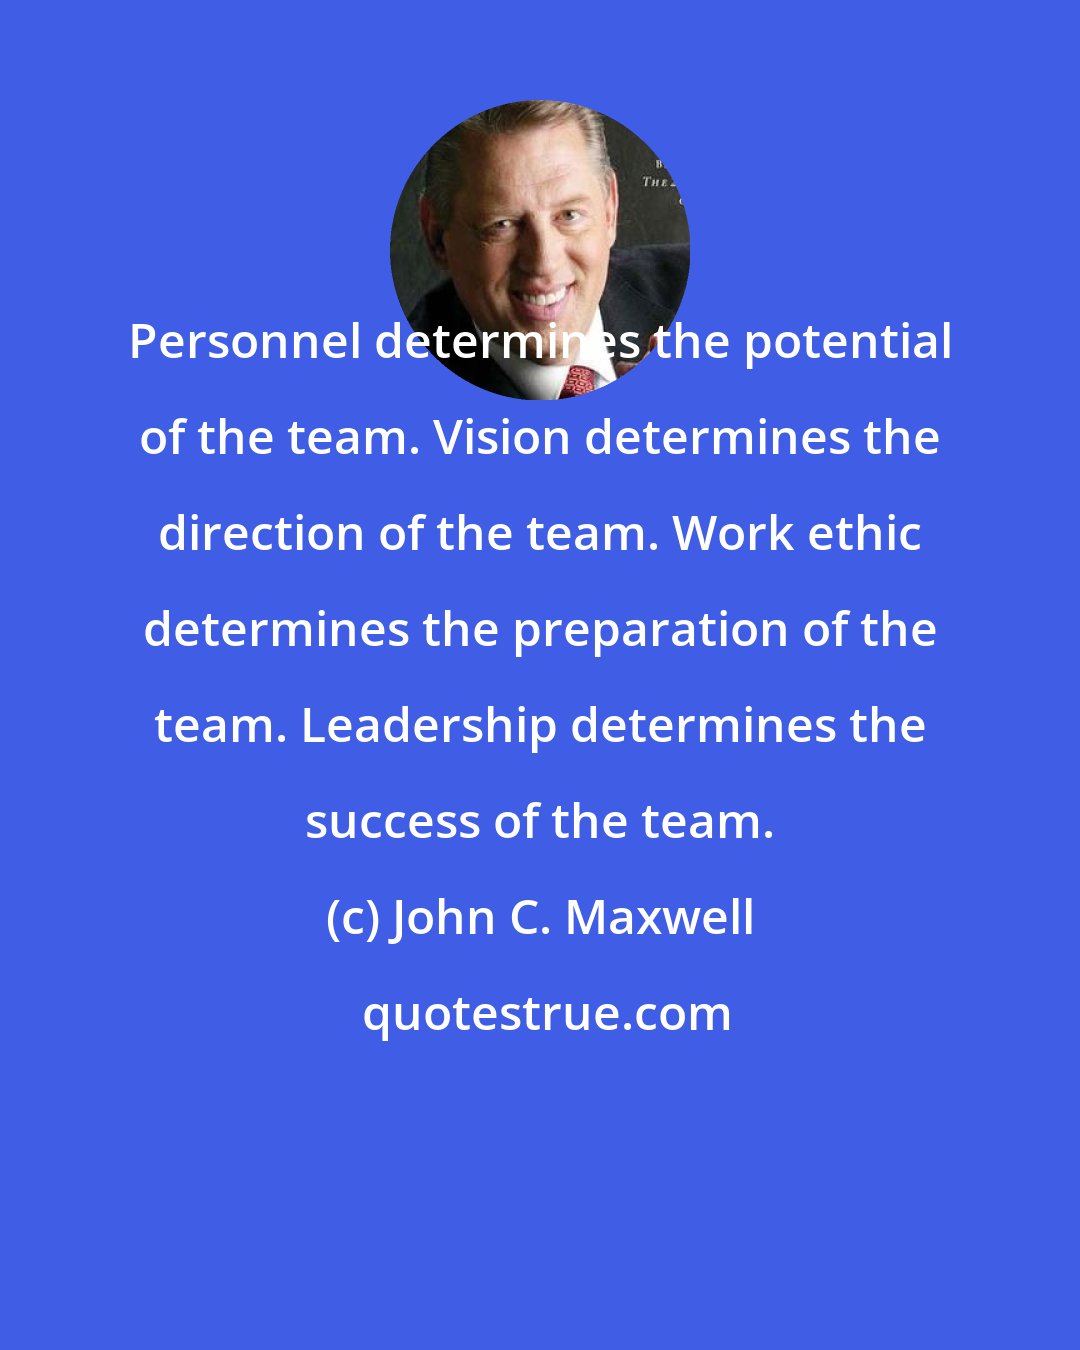 John C. Maxwell: Personnel determines the potential of the team. Vision determines the direction of the team. Work ethic determines the preparation of the team. Leadership determines the success of the team.